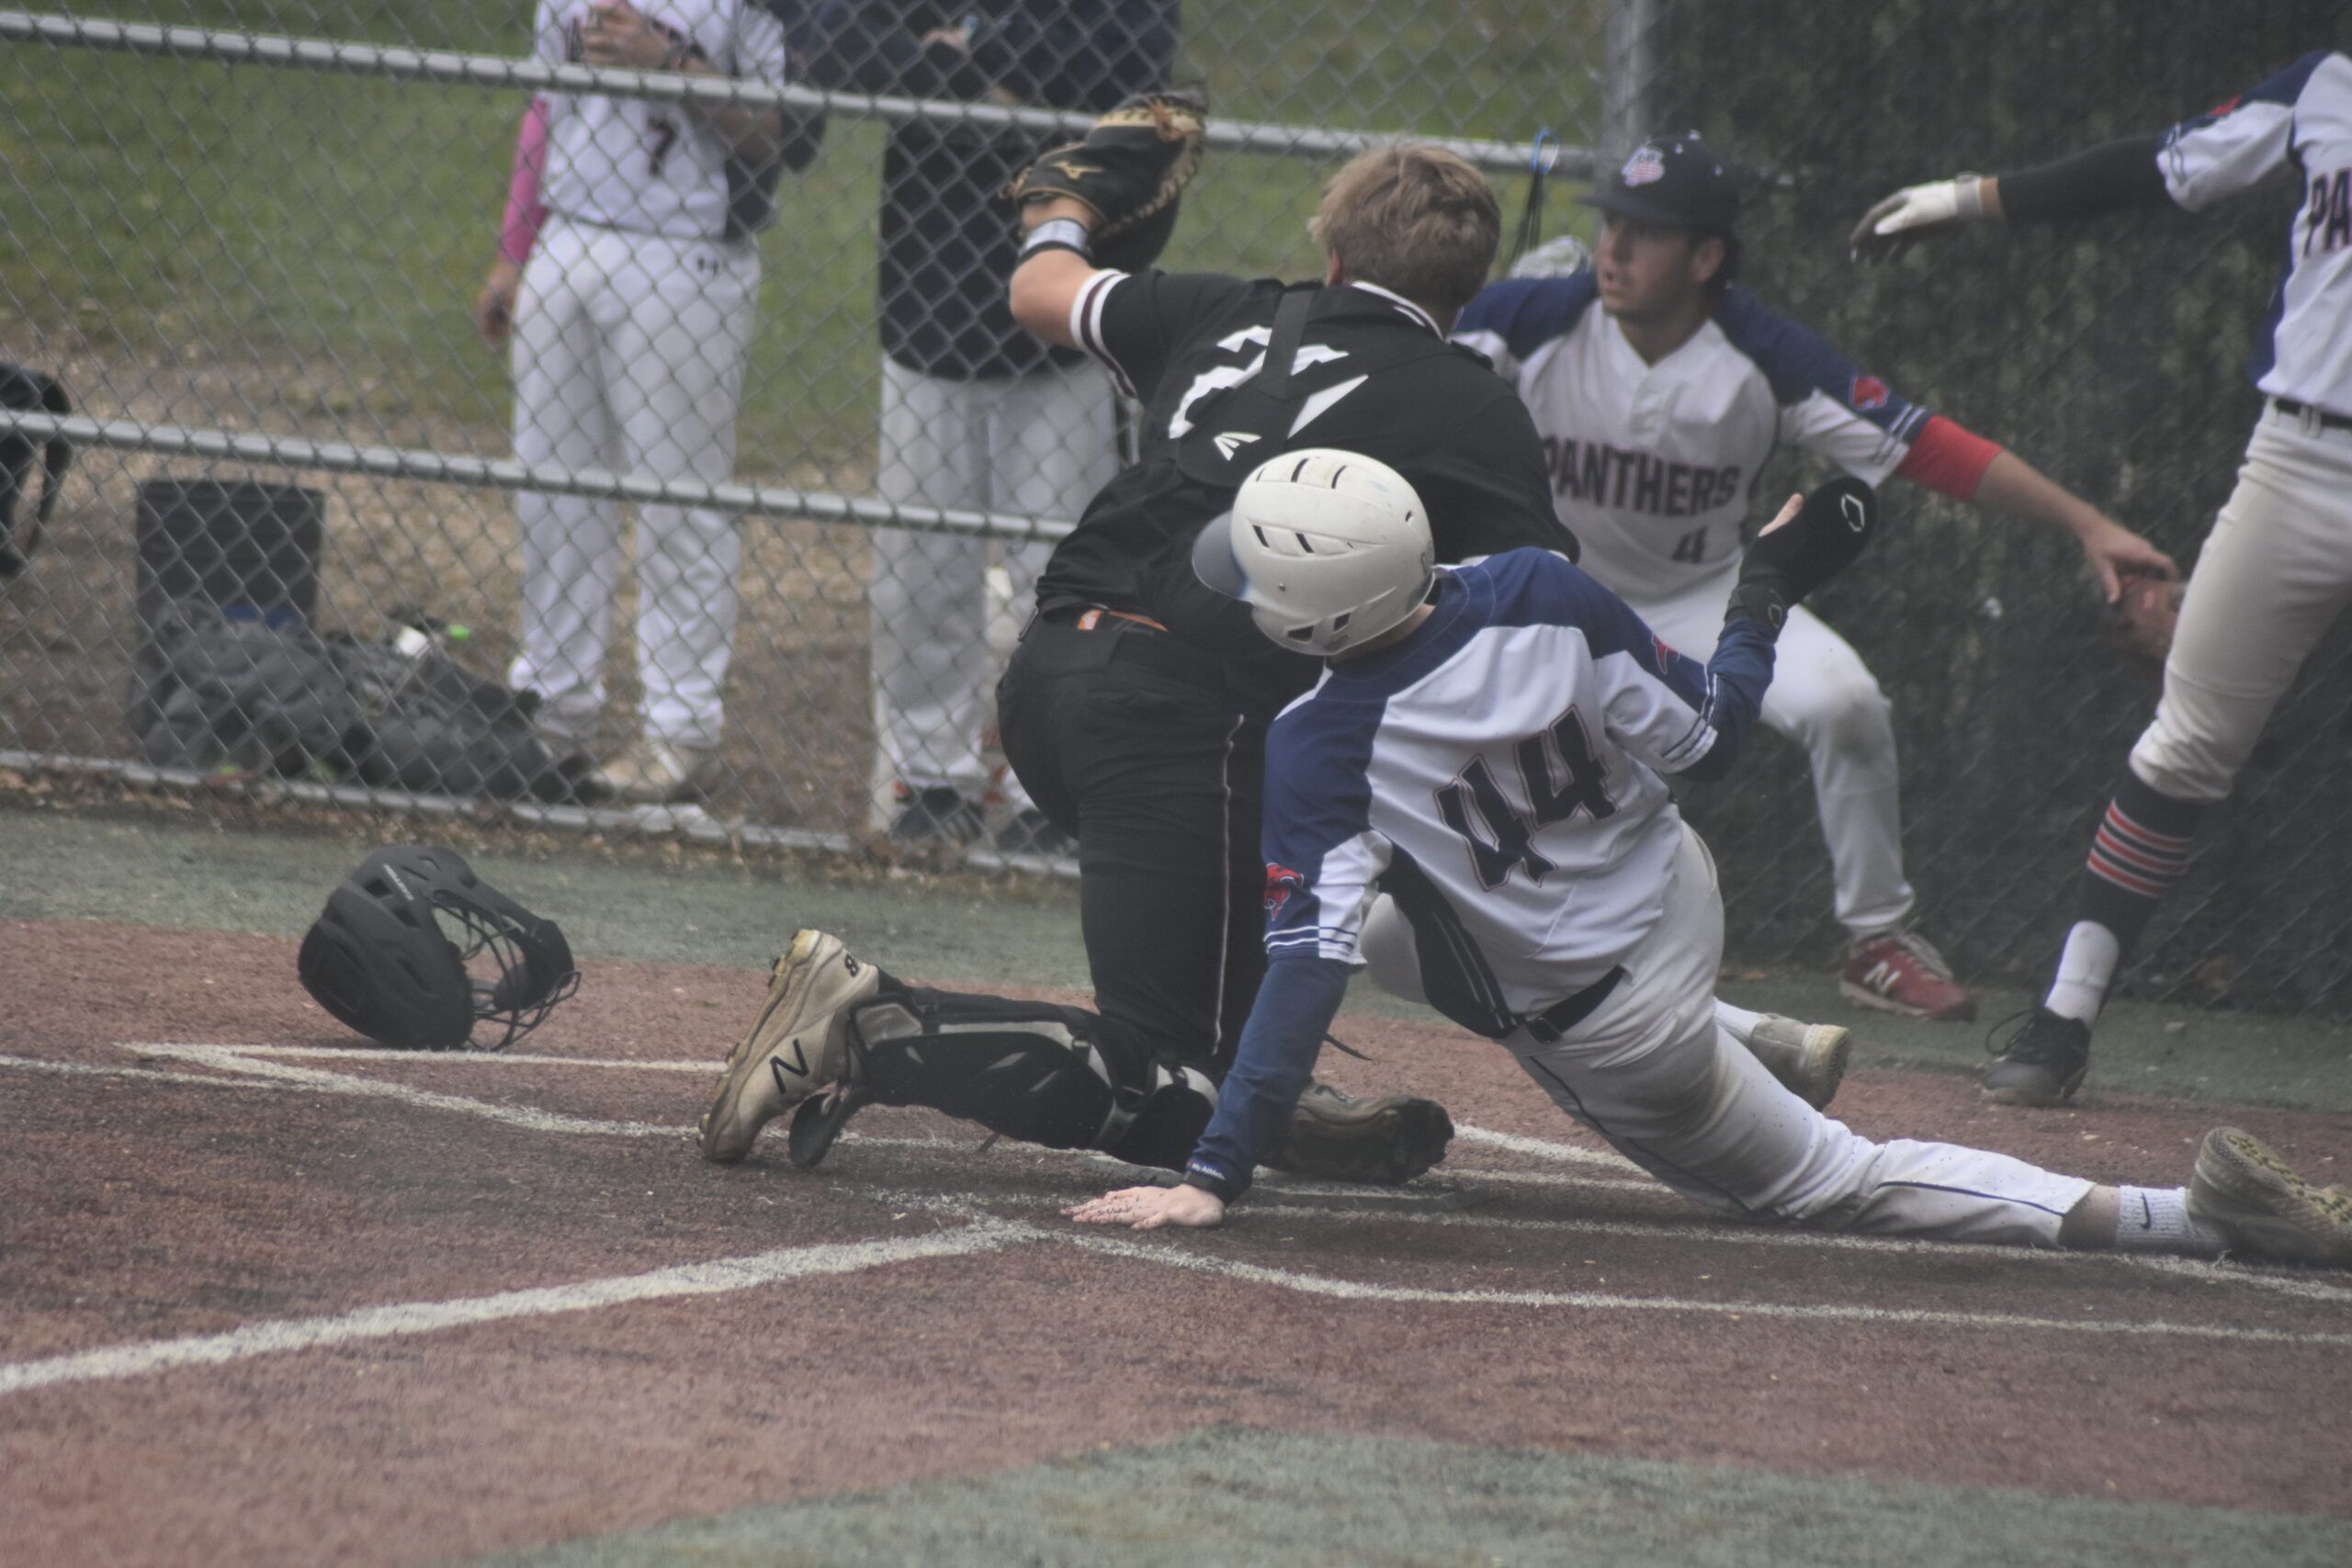 East Hampton freshman Carter Dickinson shows the umpire the ball after tagging out a Miller Place runner at the plate. Dickinson had received the strong throw from right fielder Michael Locascio.   DREW BUDD